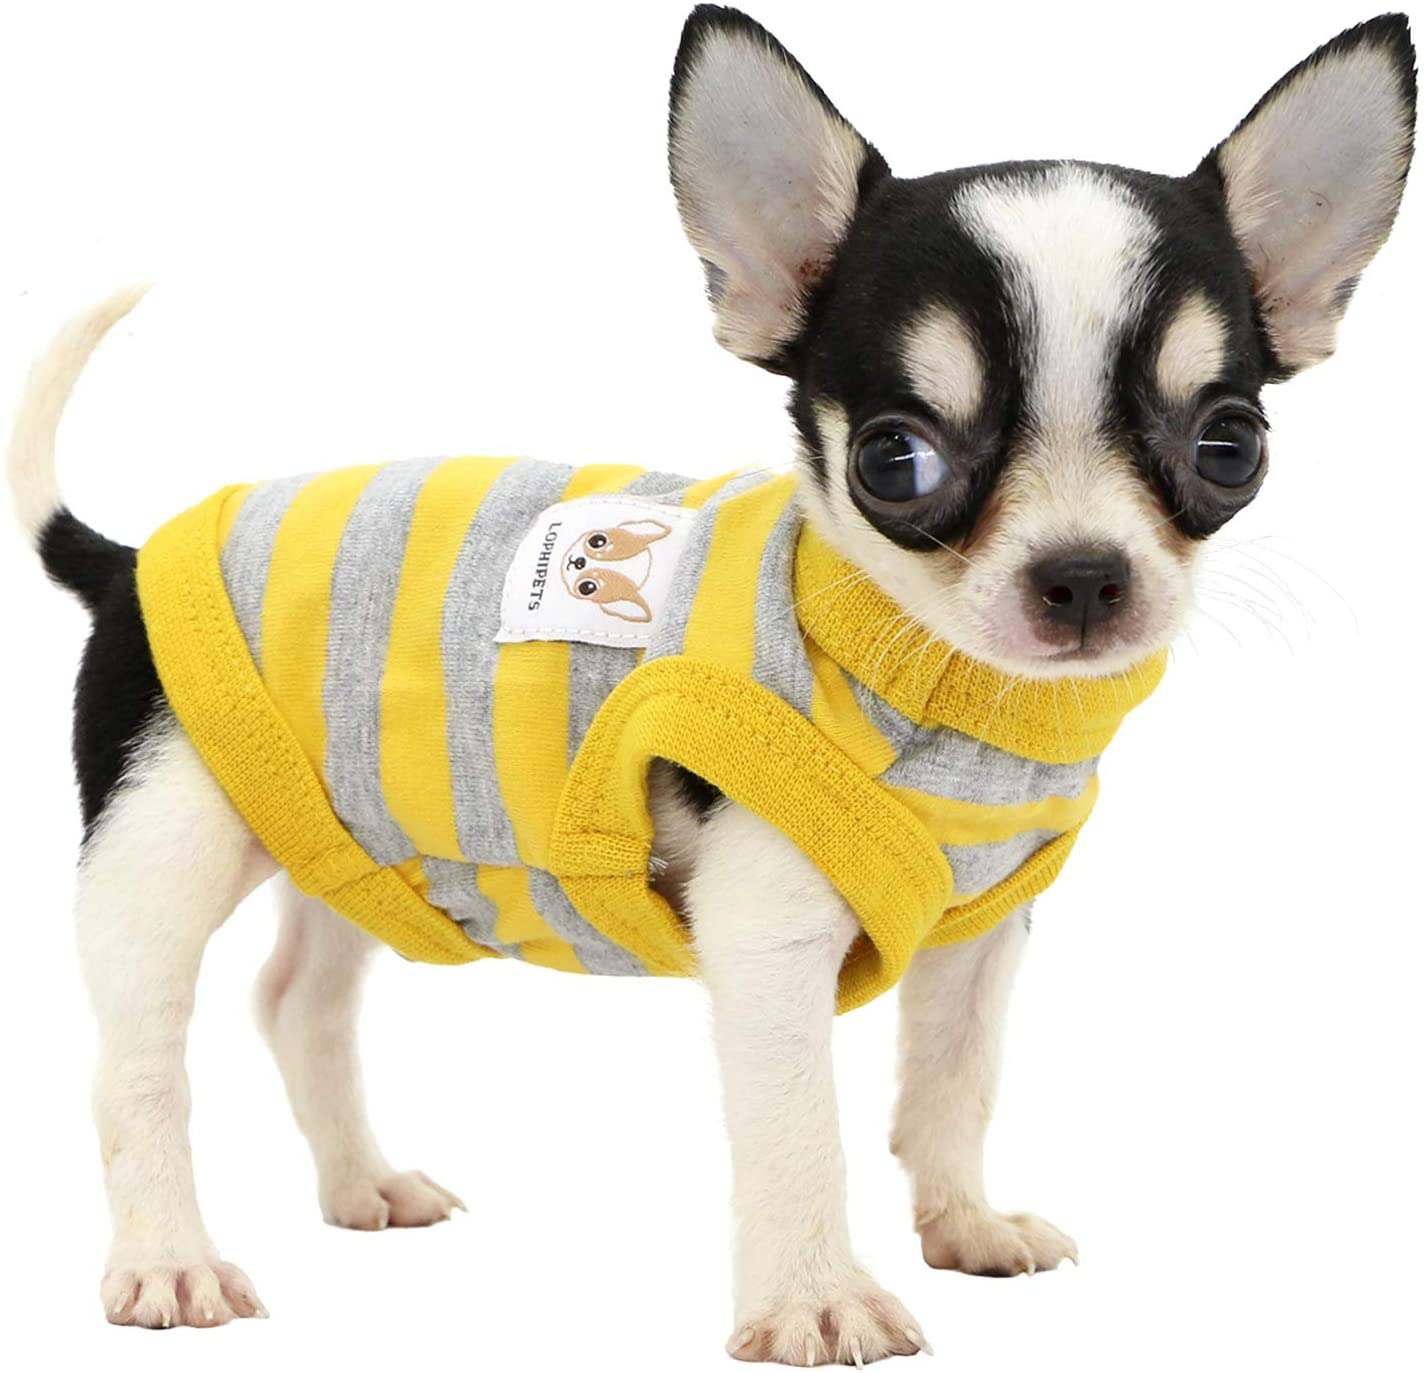 LOPHIPETS 100% Cotton Striped Dog Shirts for Puppy Small Dogs Chihuahua